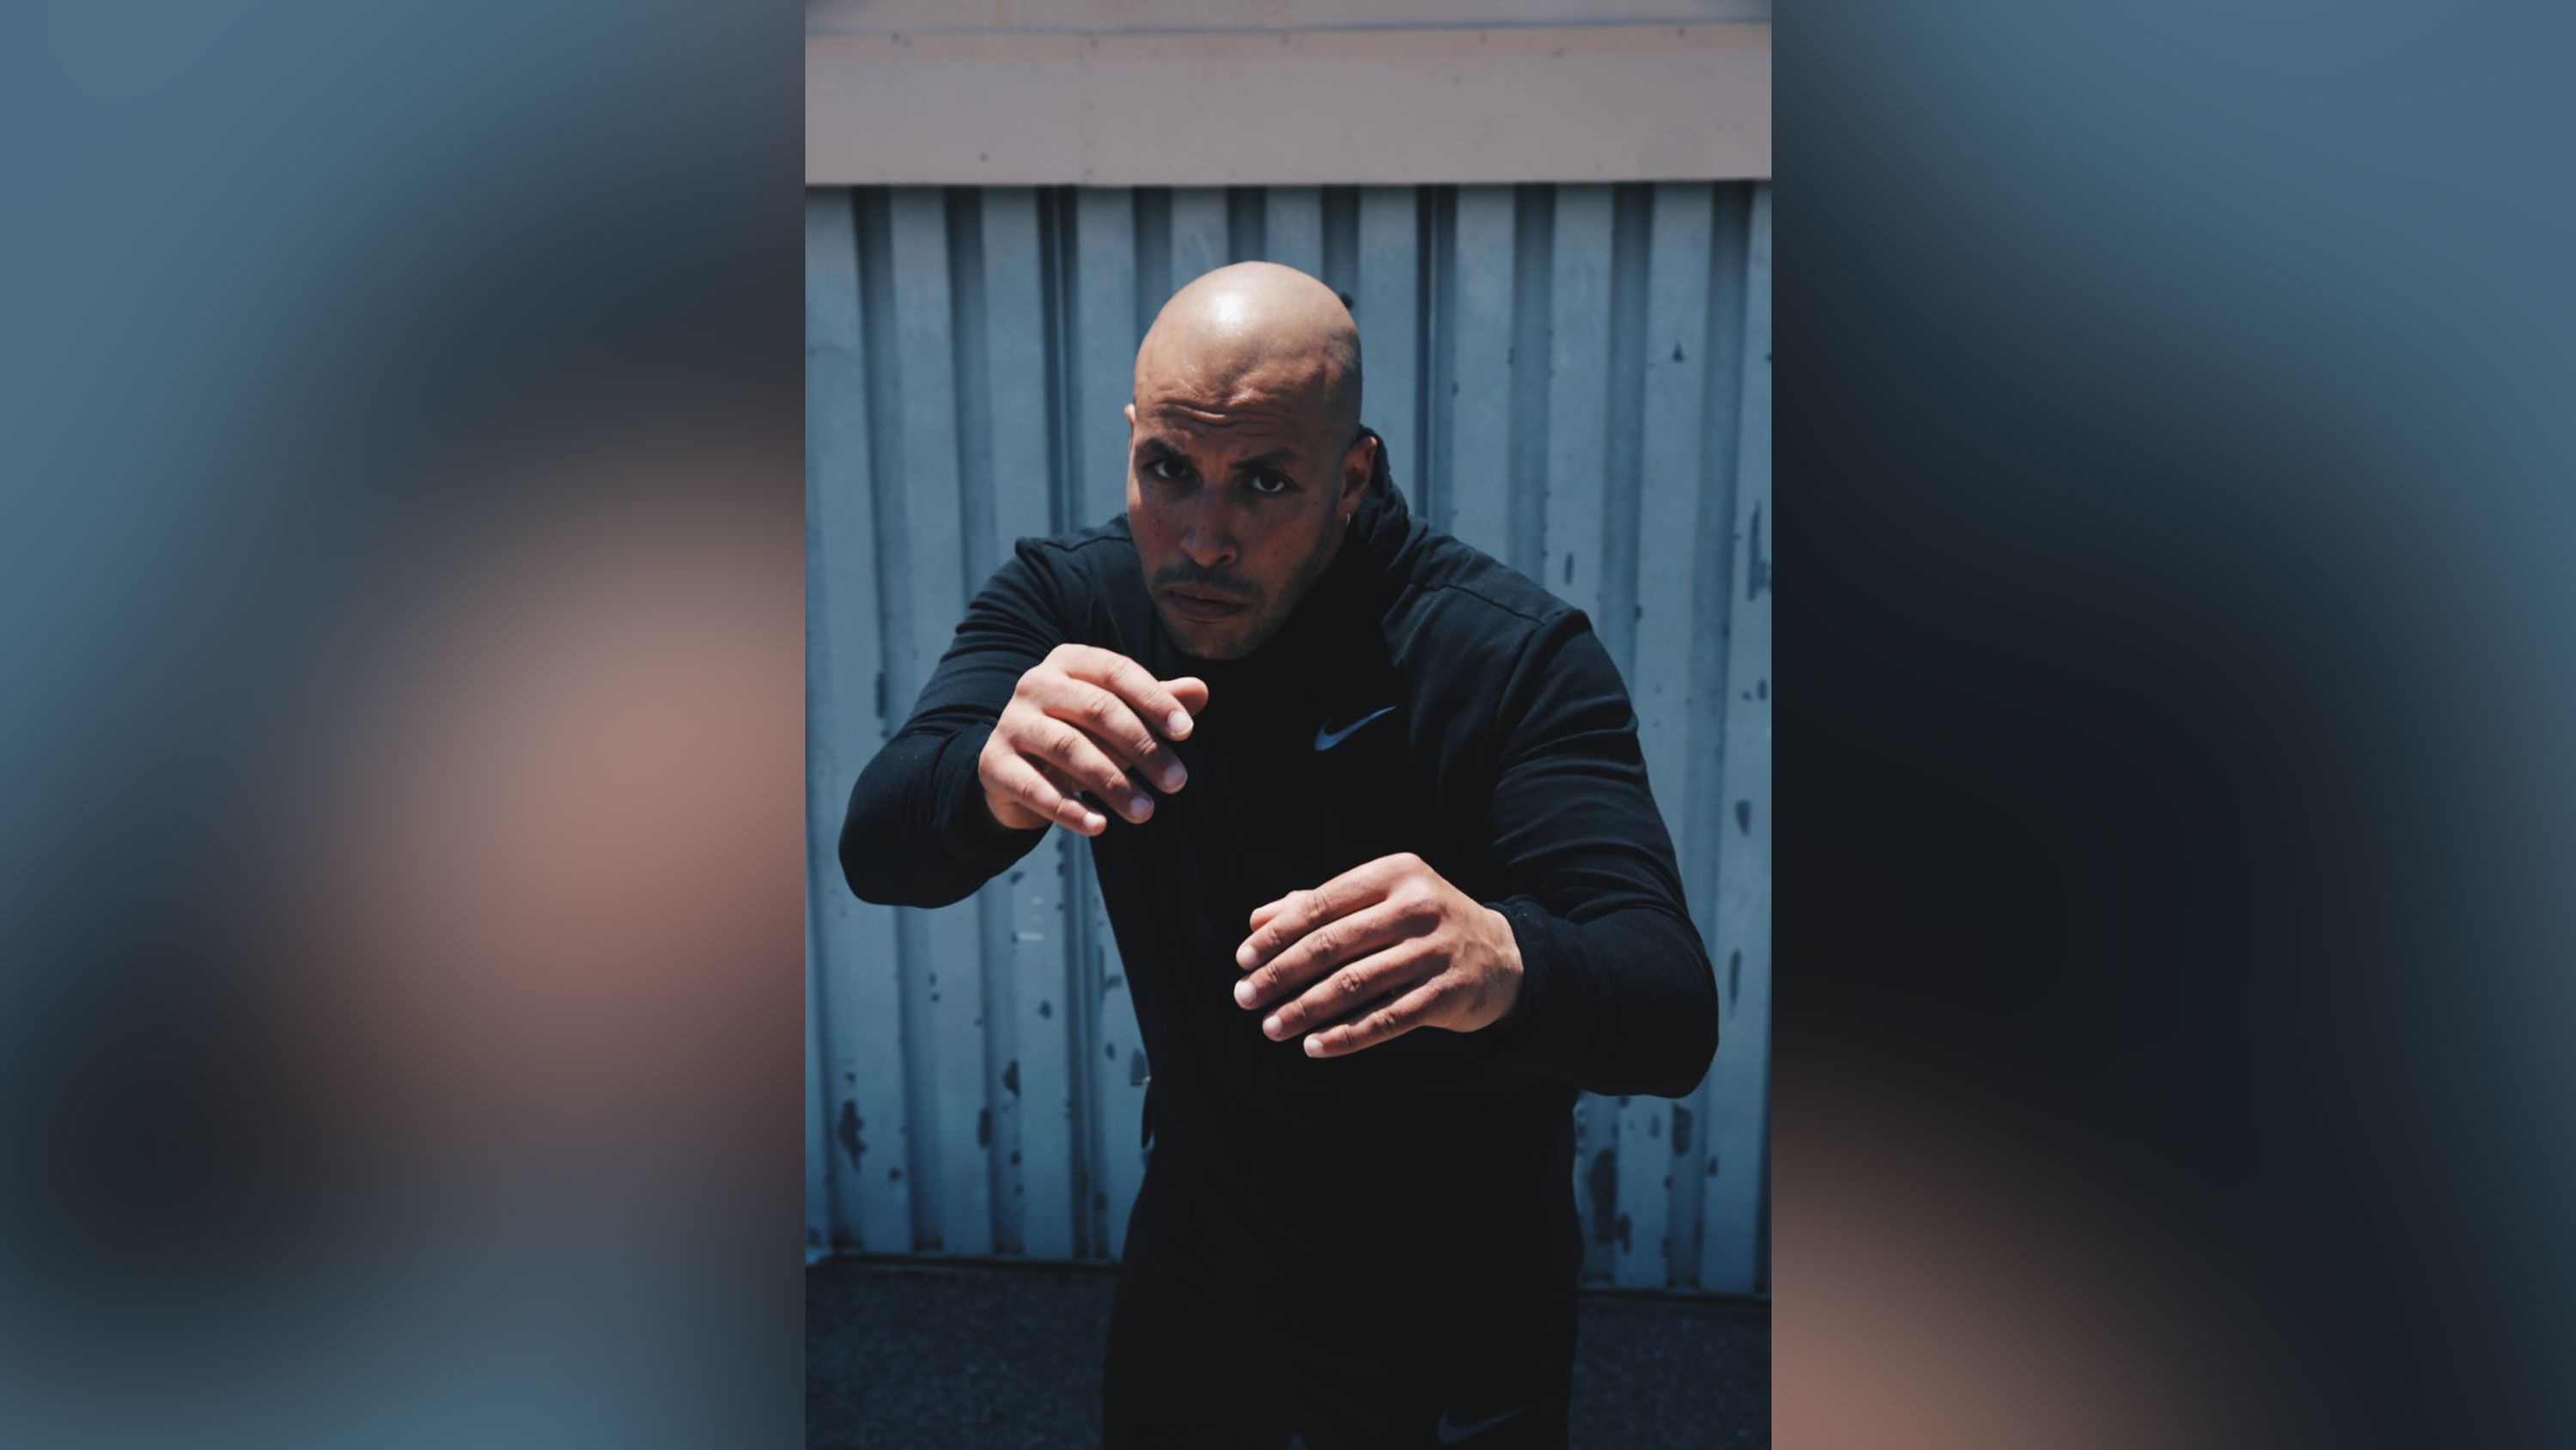 Chiheb Soumer is a Los Angeles-based trainer. He worked in corporate fitness before Covid-19 hit and shuttered office life. He is now focused on building his brand as a trainer. 